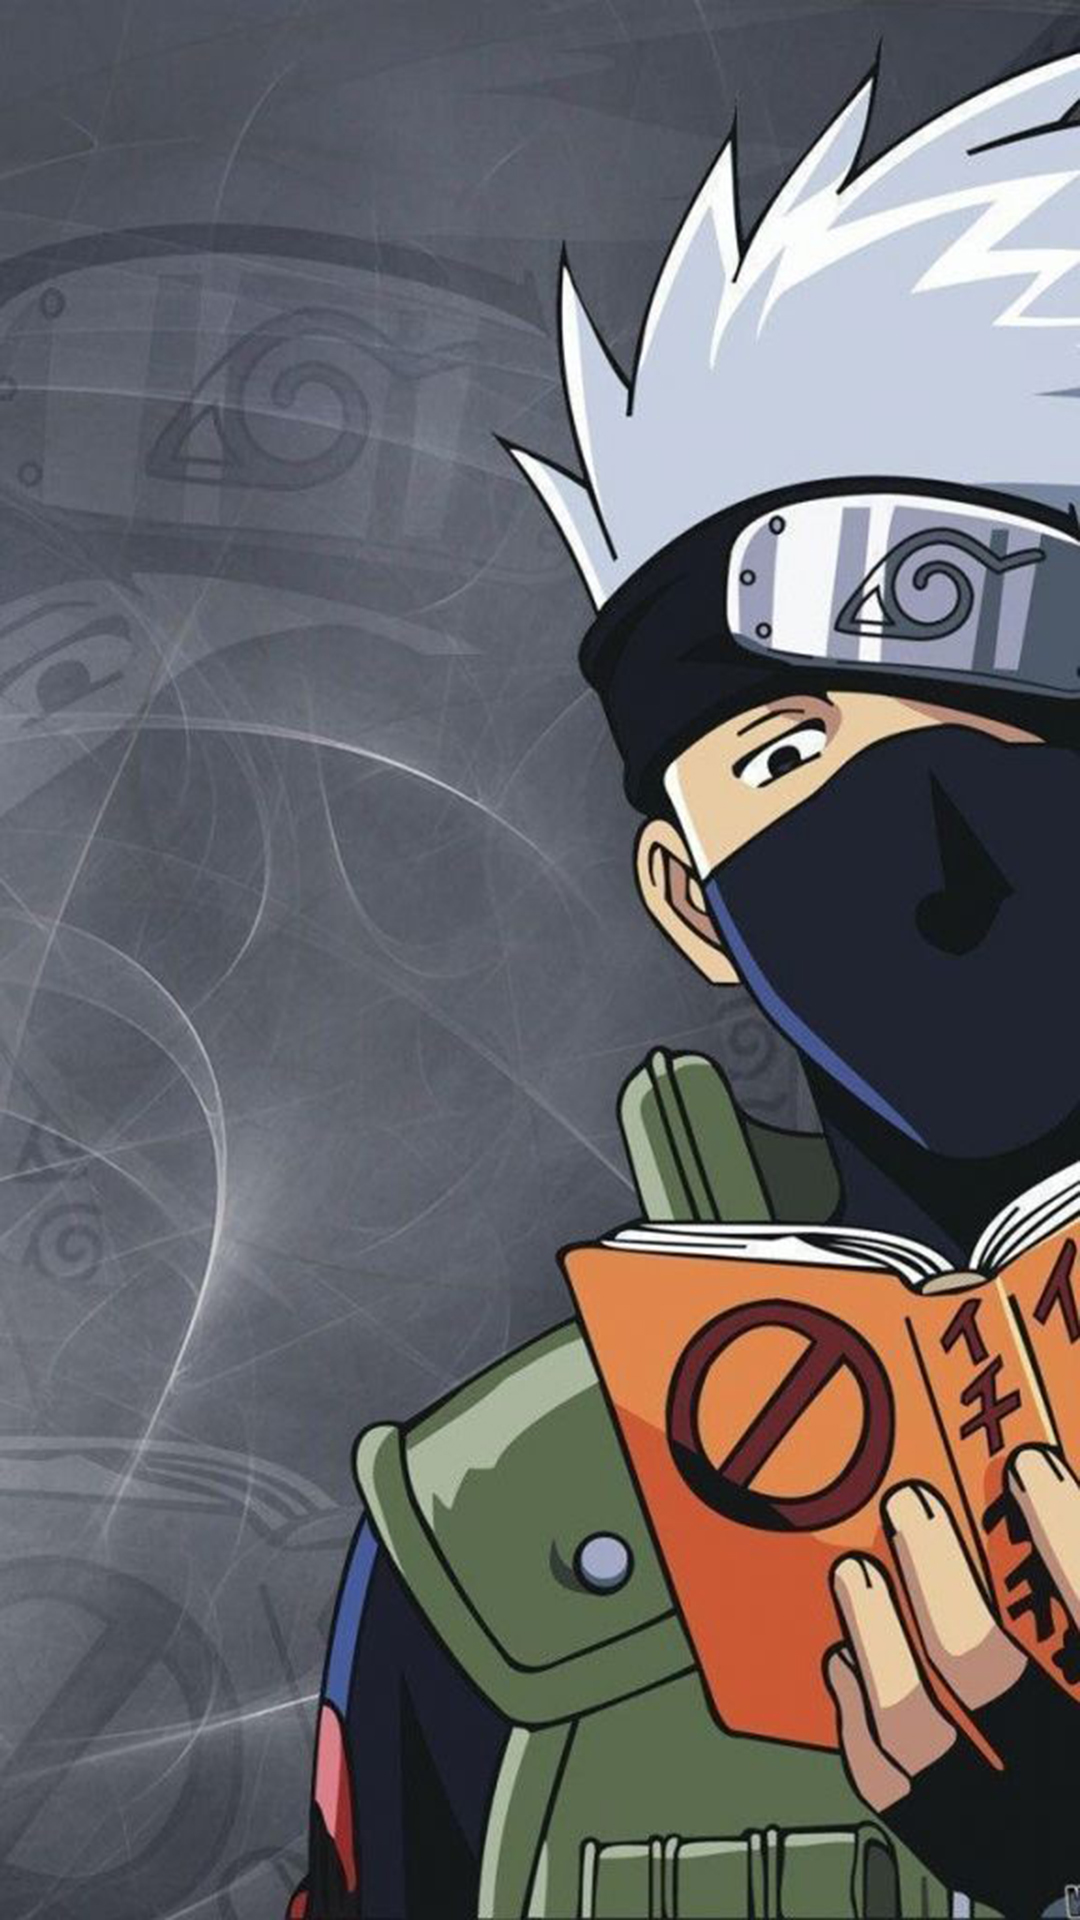 A Kakashi Aesthetic Wallpaper and Gif I made Suggestions are open   rNaruto